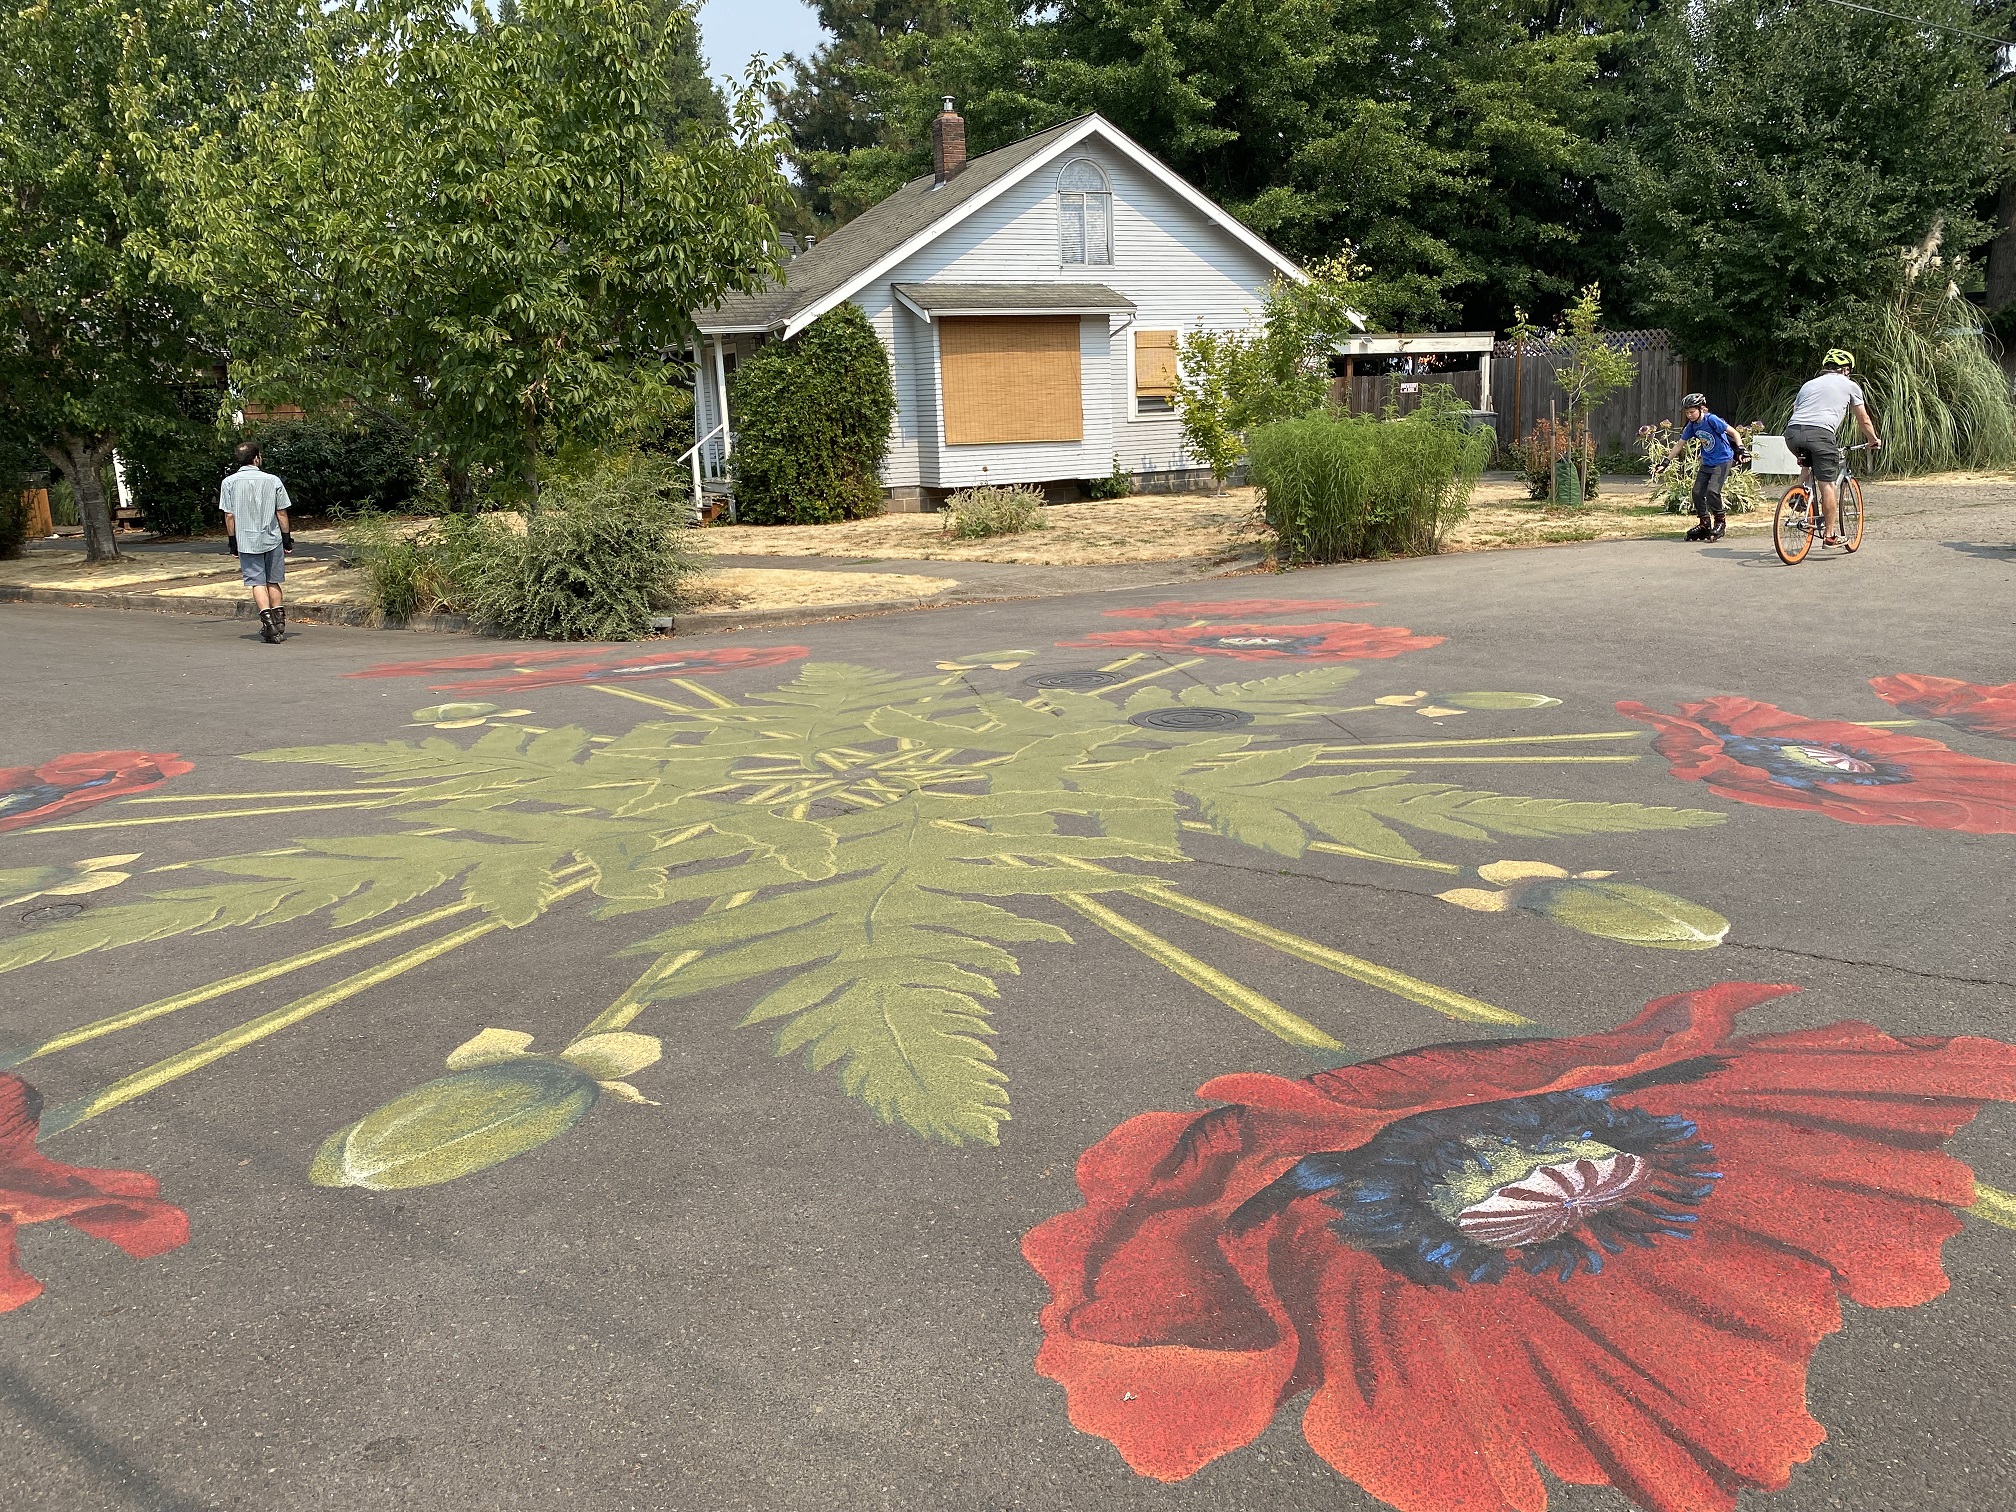 A street mural of poppies radiating out from a center point.